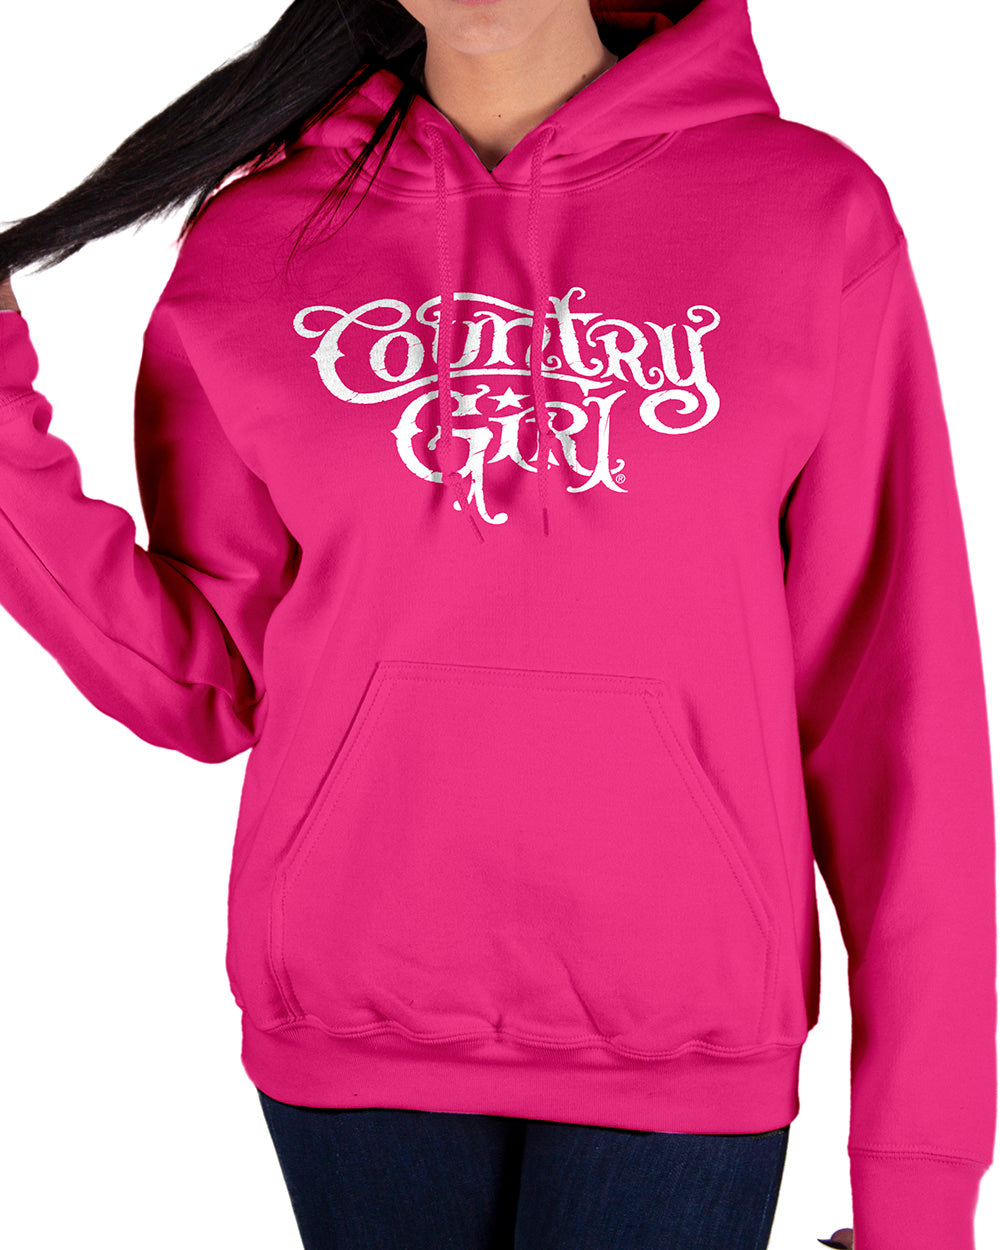 Country Girl Hoodies & Sweatshirts - Country Hoodies for Women – Page 6 ...